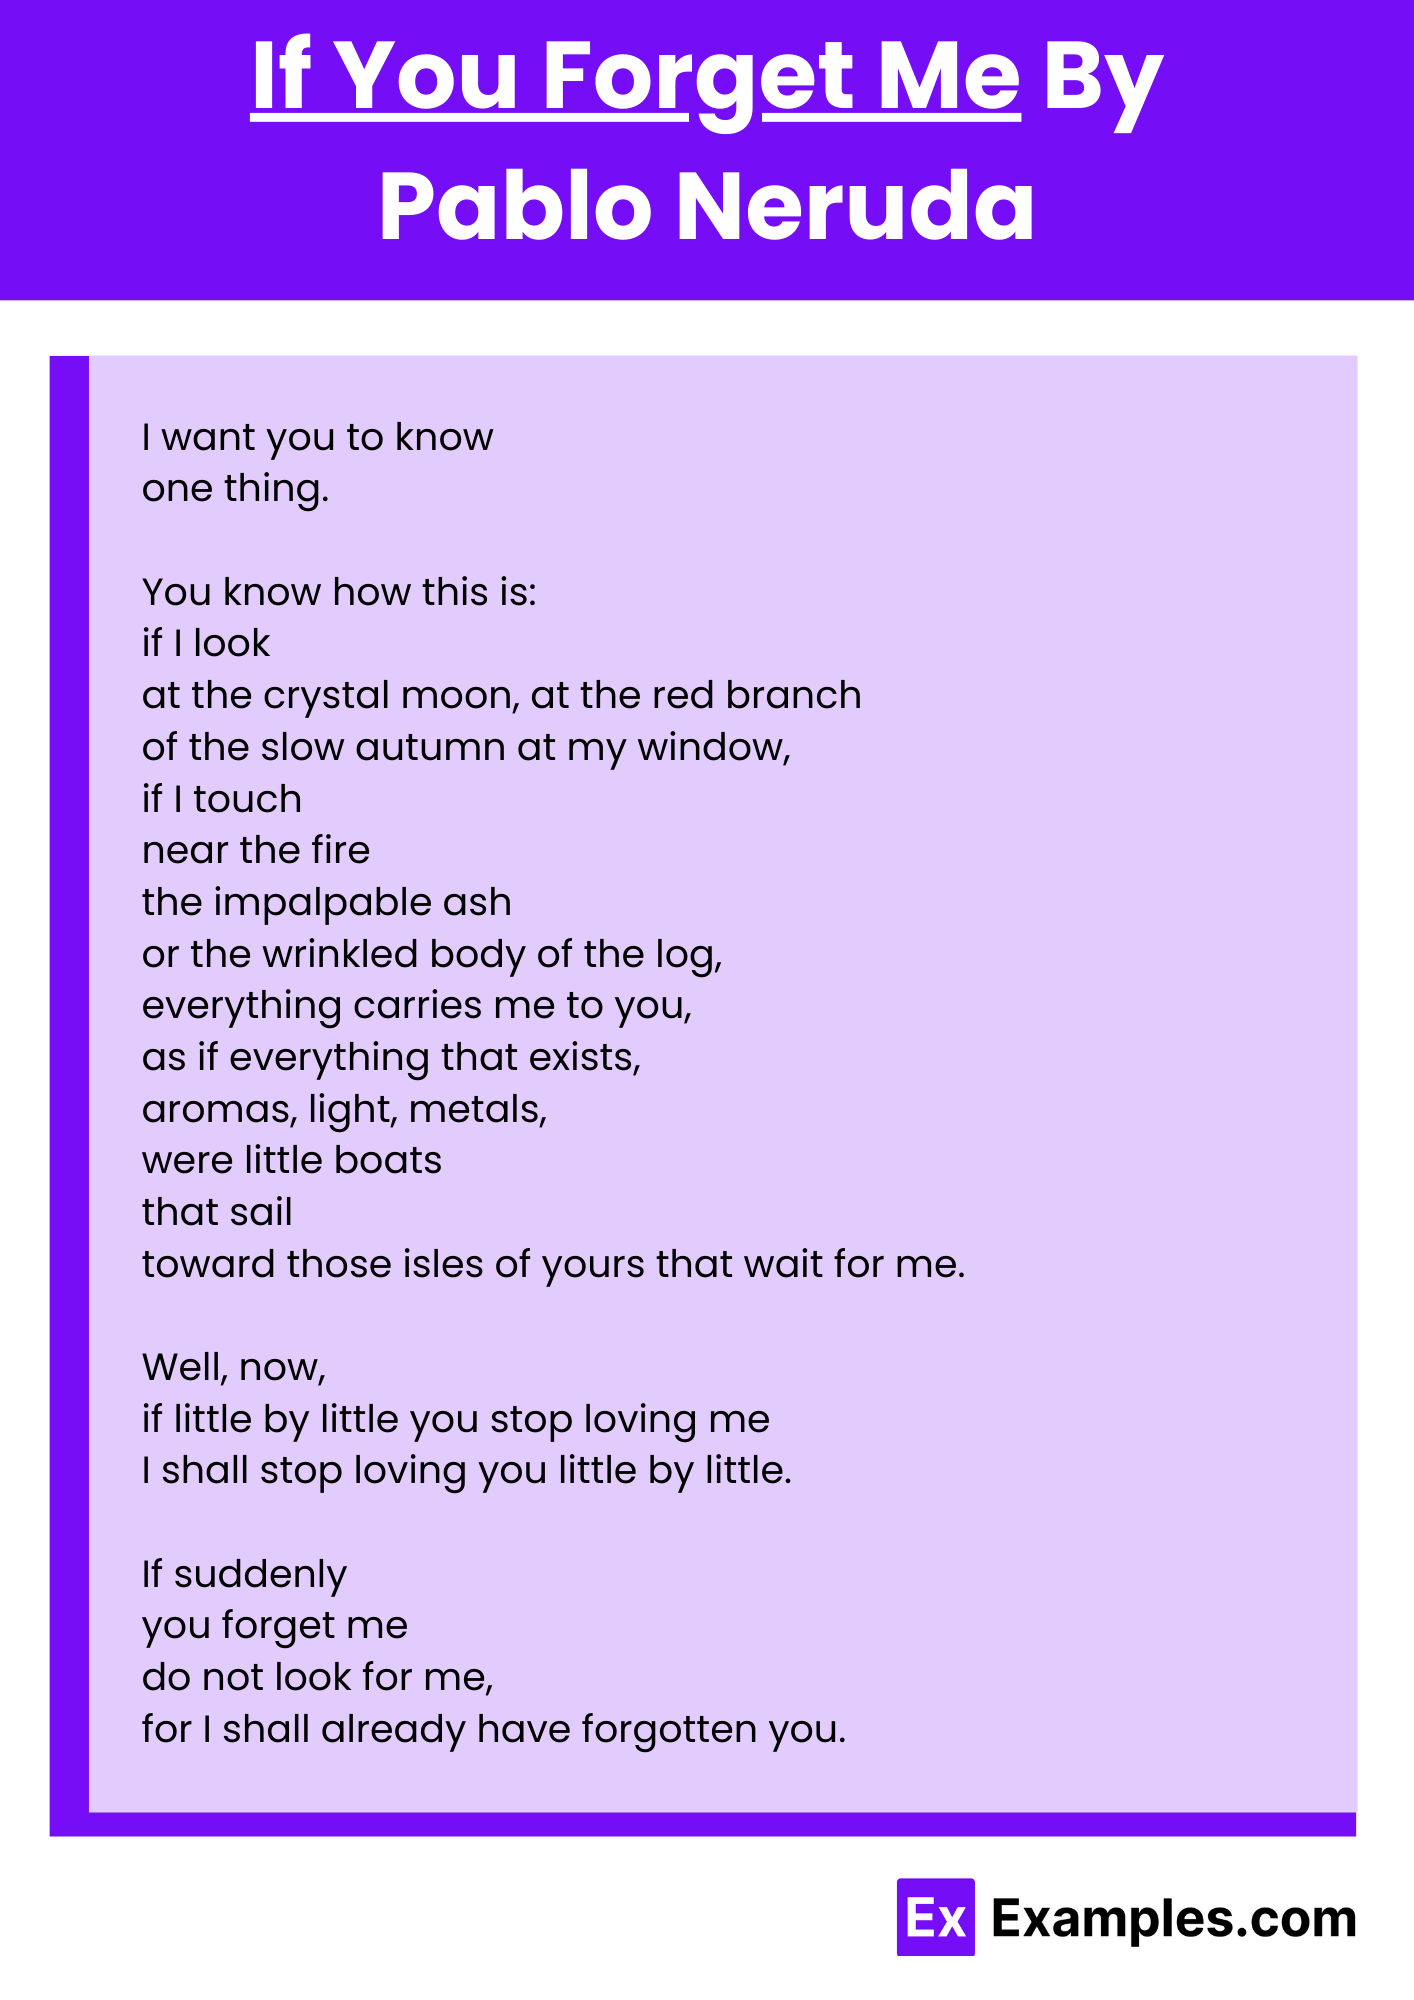 If You Forget Me By Pablo Neruda